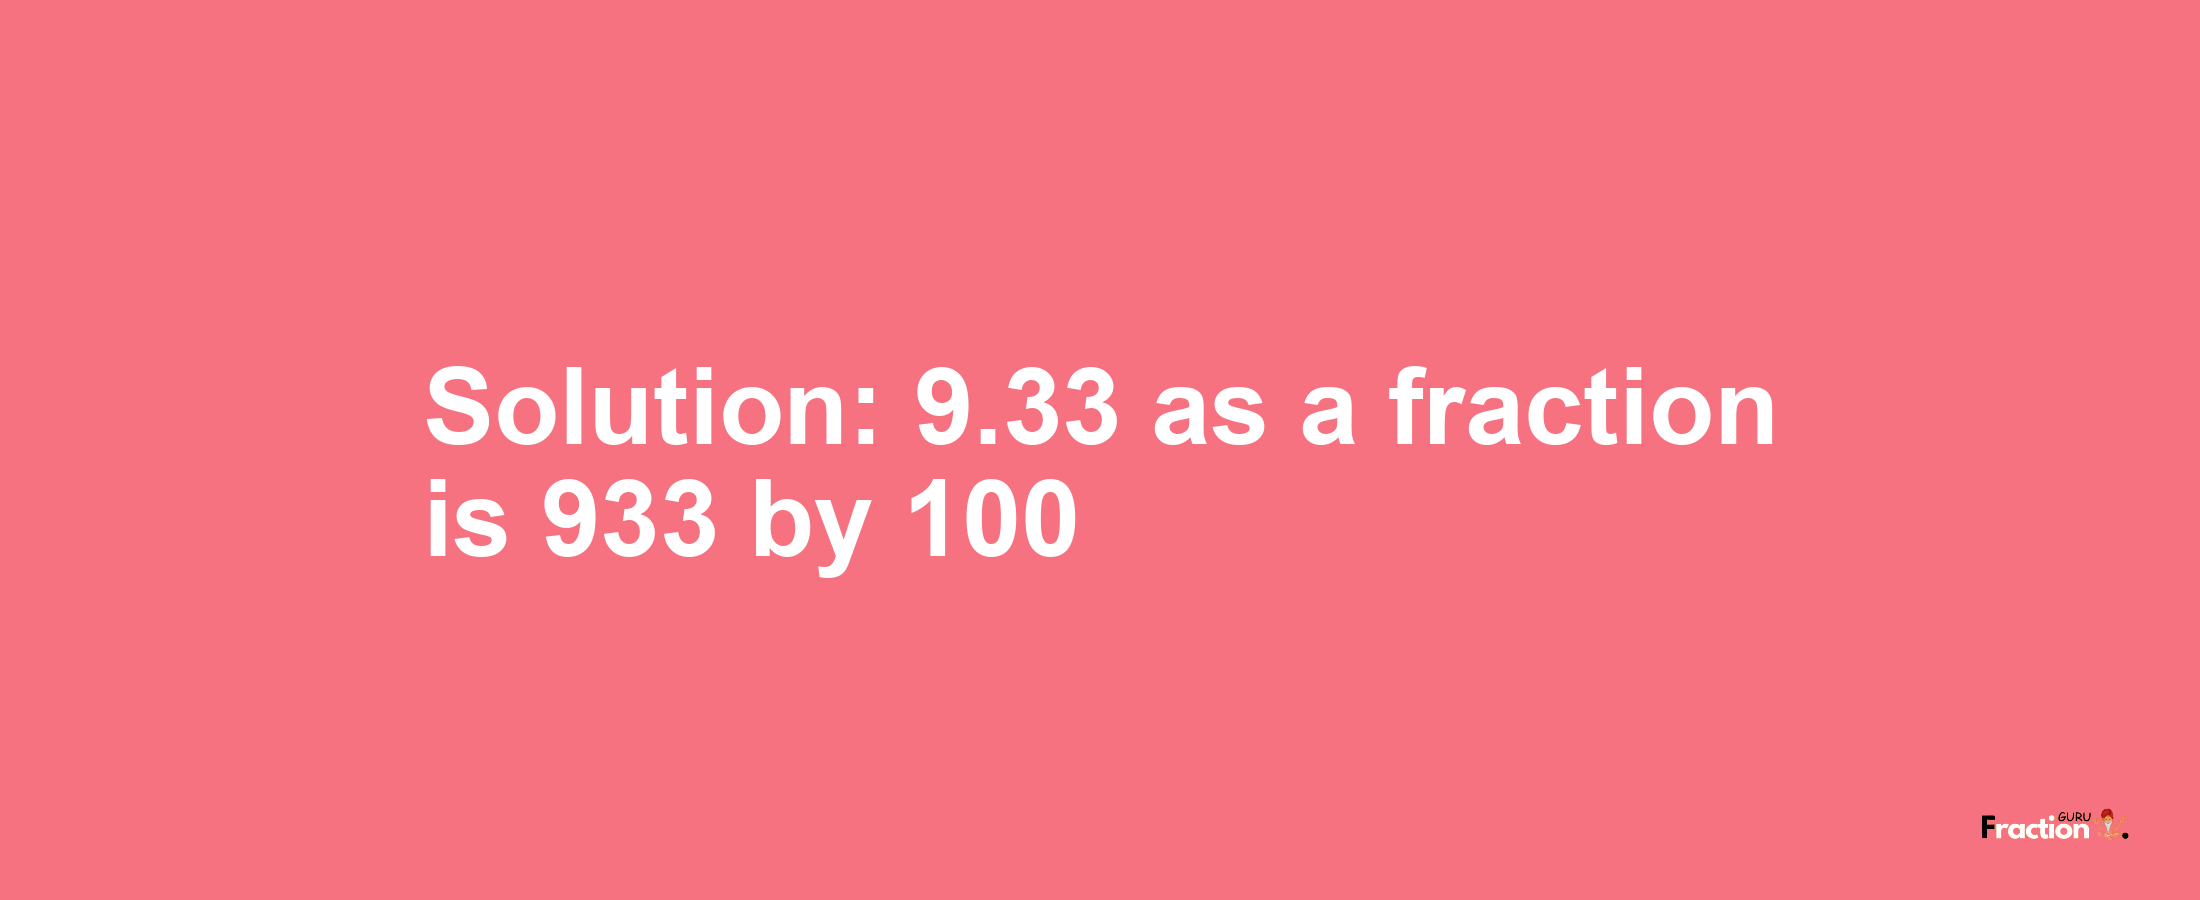 Solution:9.33 as a fraction is 933/100